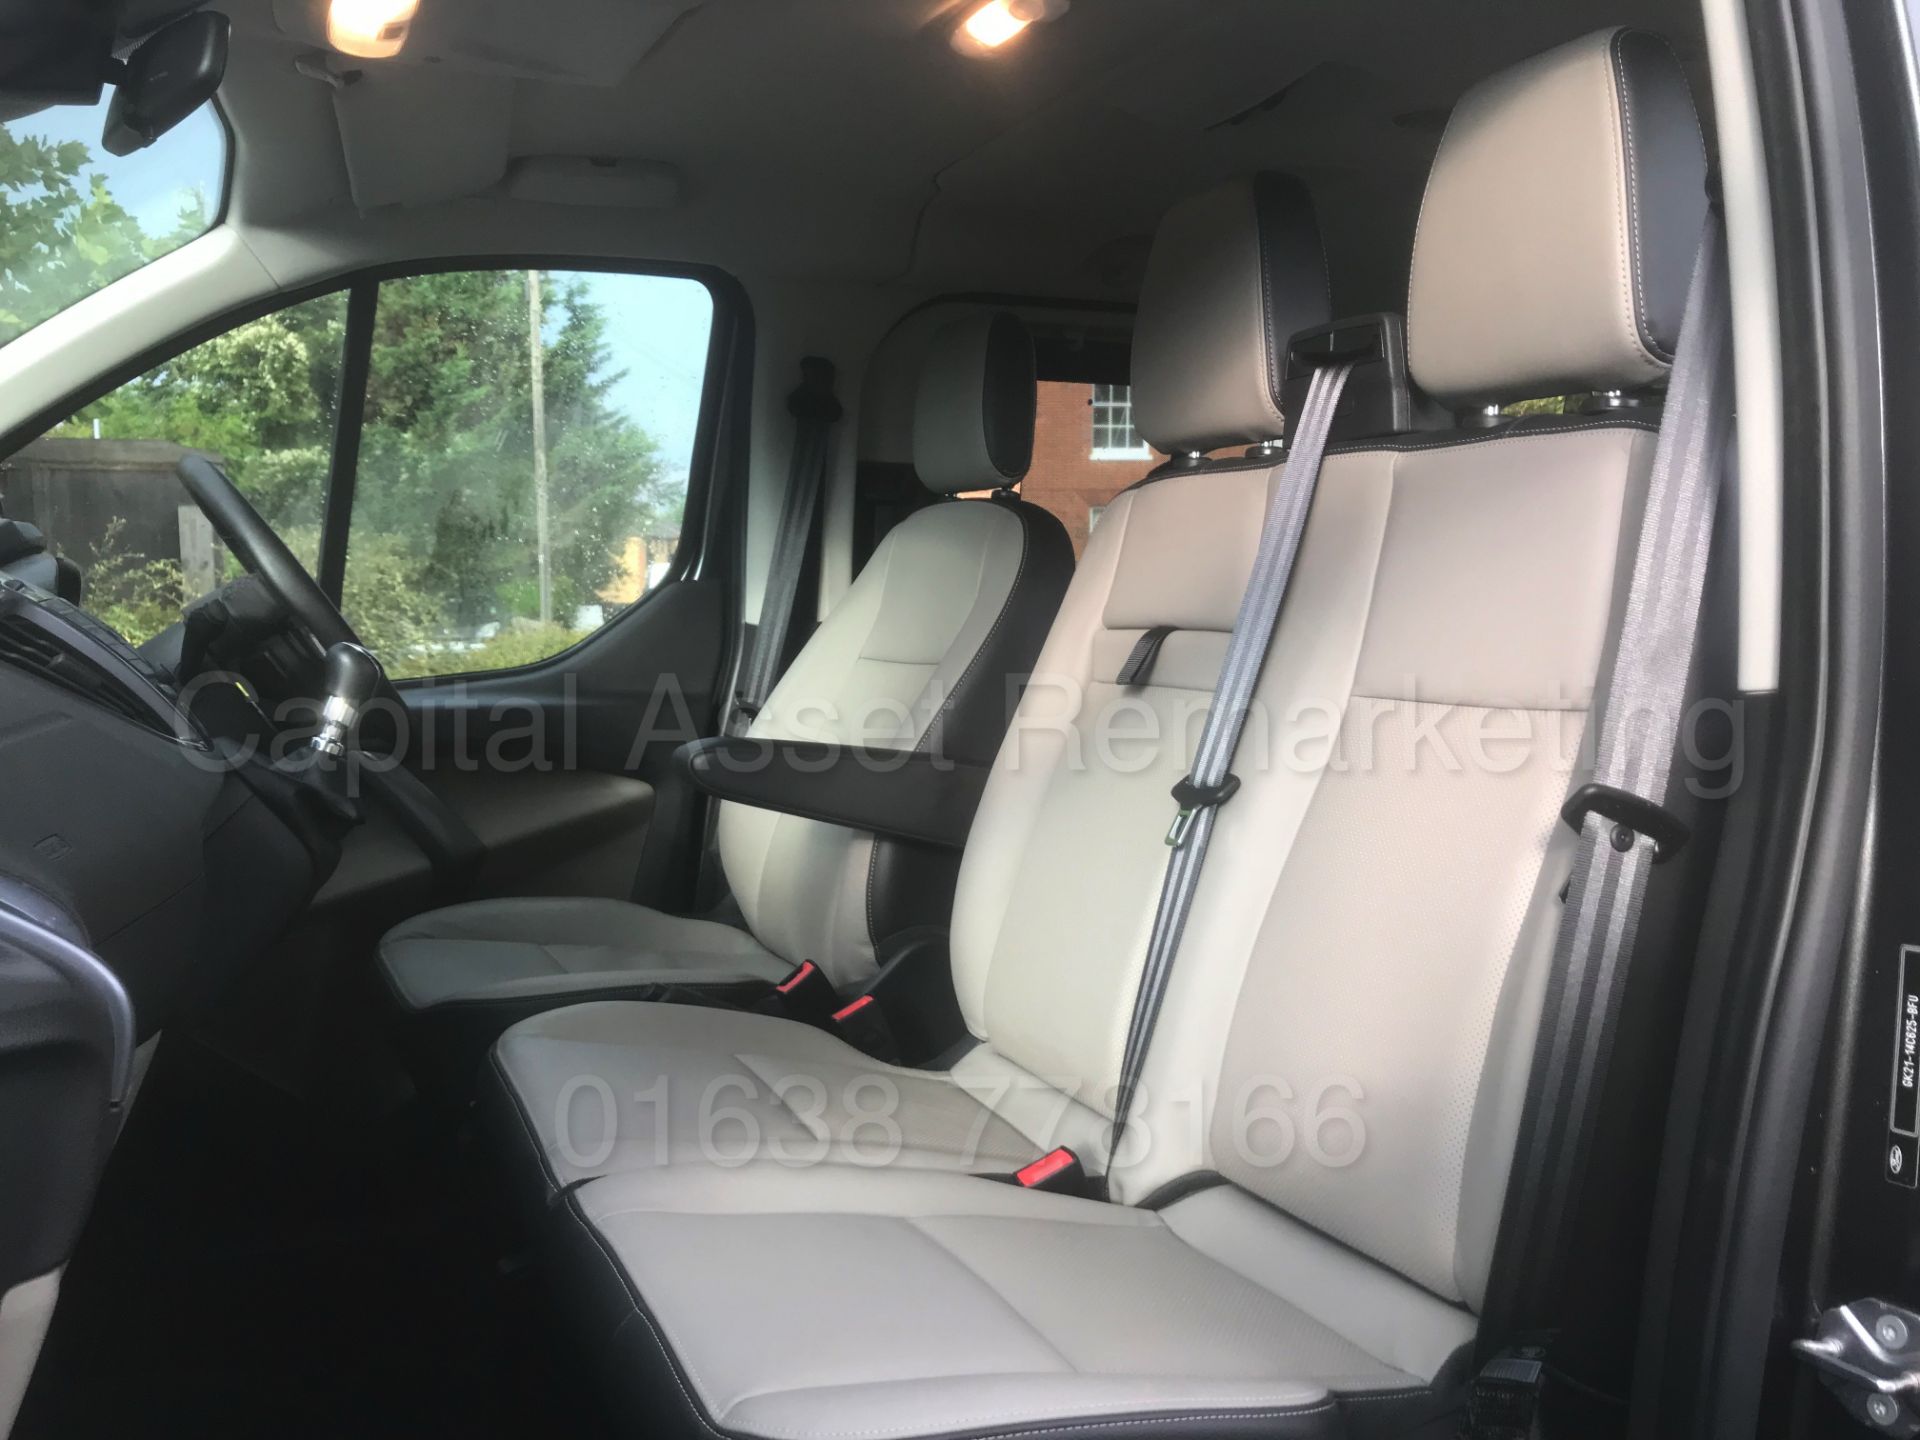 FORD TRANSIT 'TOURNEO' *TITANIUM EDITION* (2018) *9 SEATER MPV* '2.0 TDCI - 6 SPEED' *LOW MILES* - Image 29 of 62